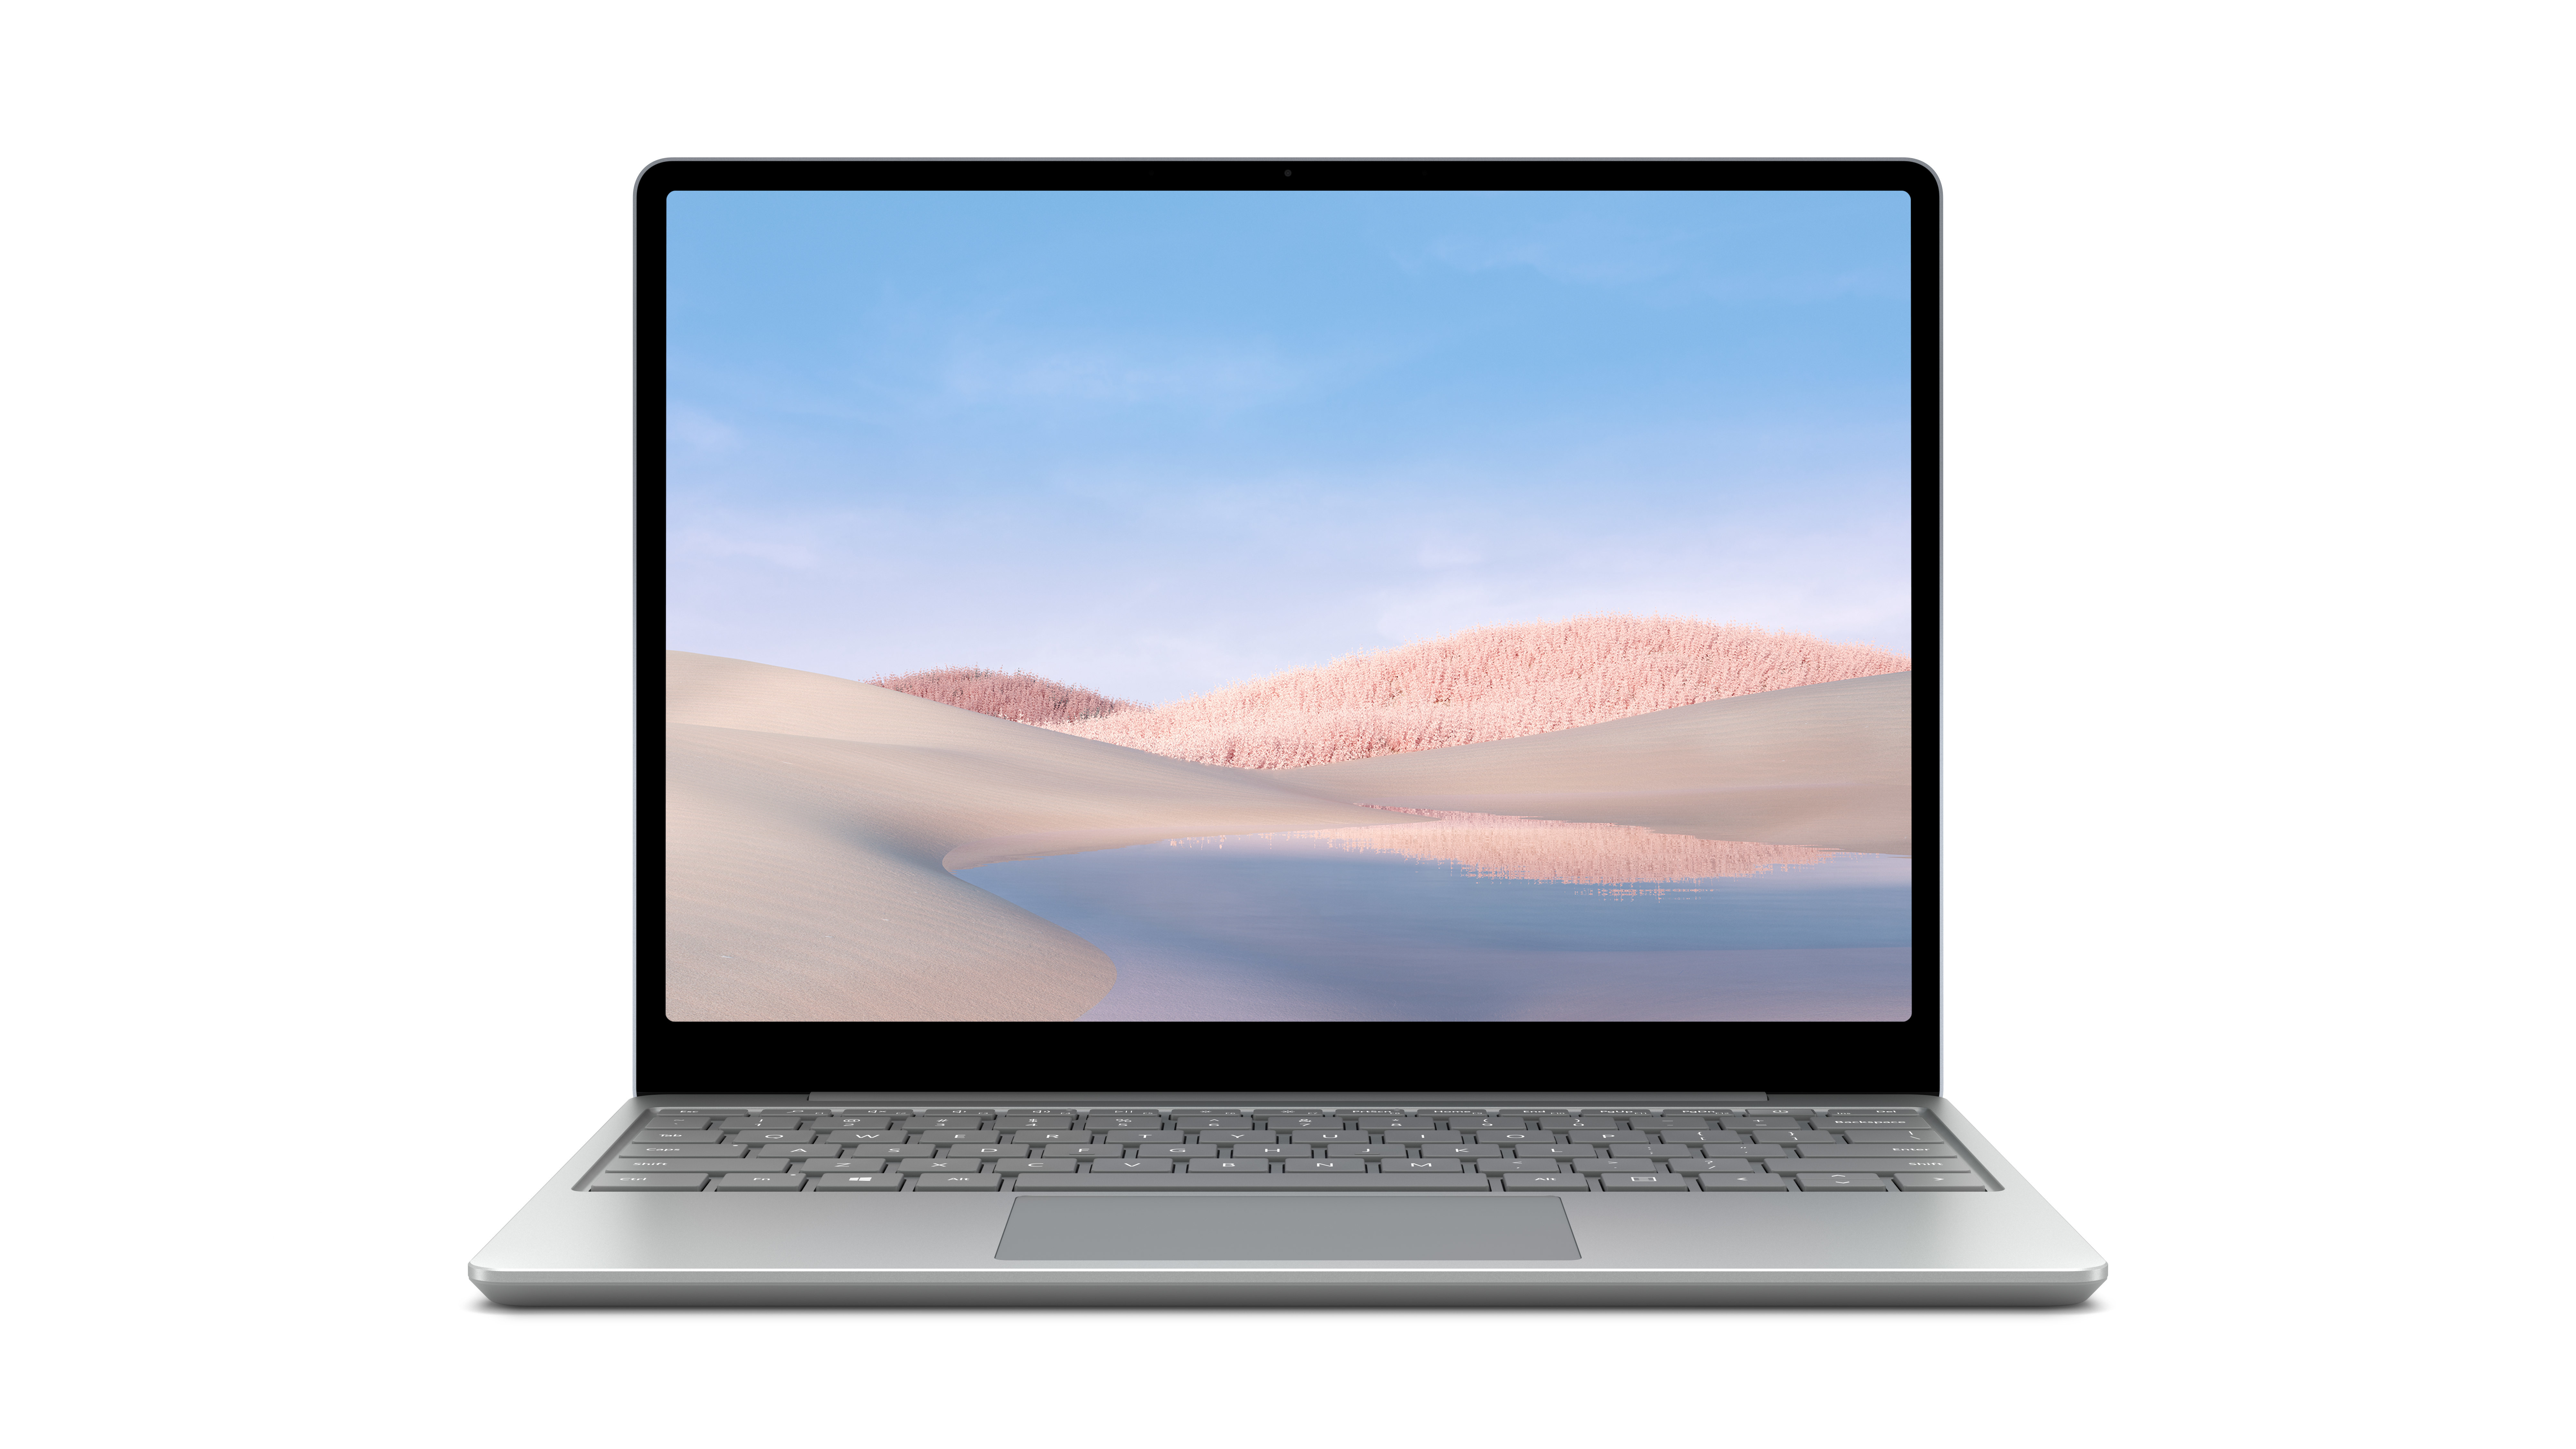 Microsoft Surface Laptop Go i5-1035G1 8GB 256SSD 12.4 Touch W10 Home S Platinum